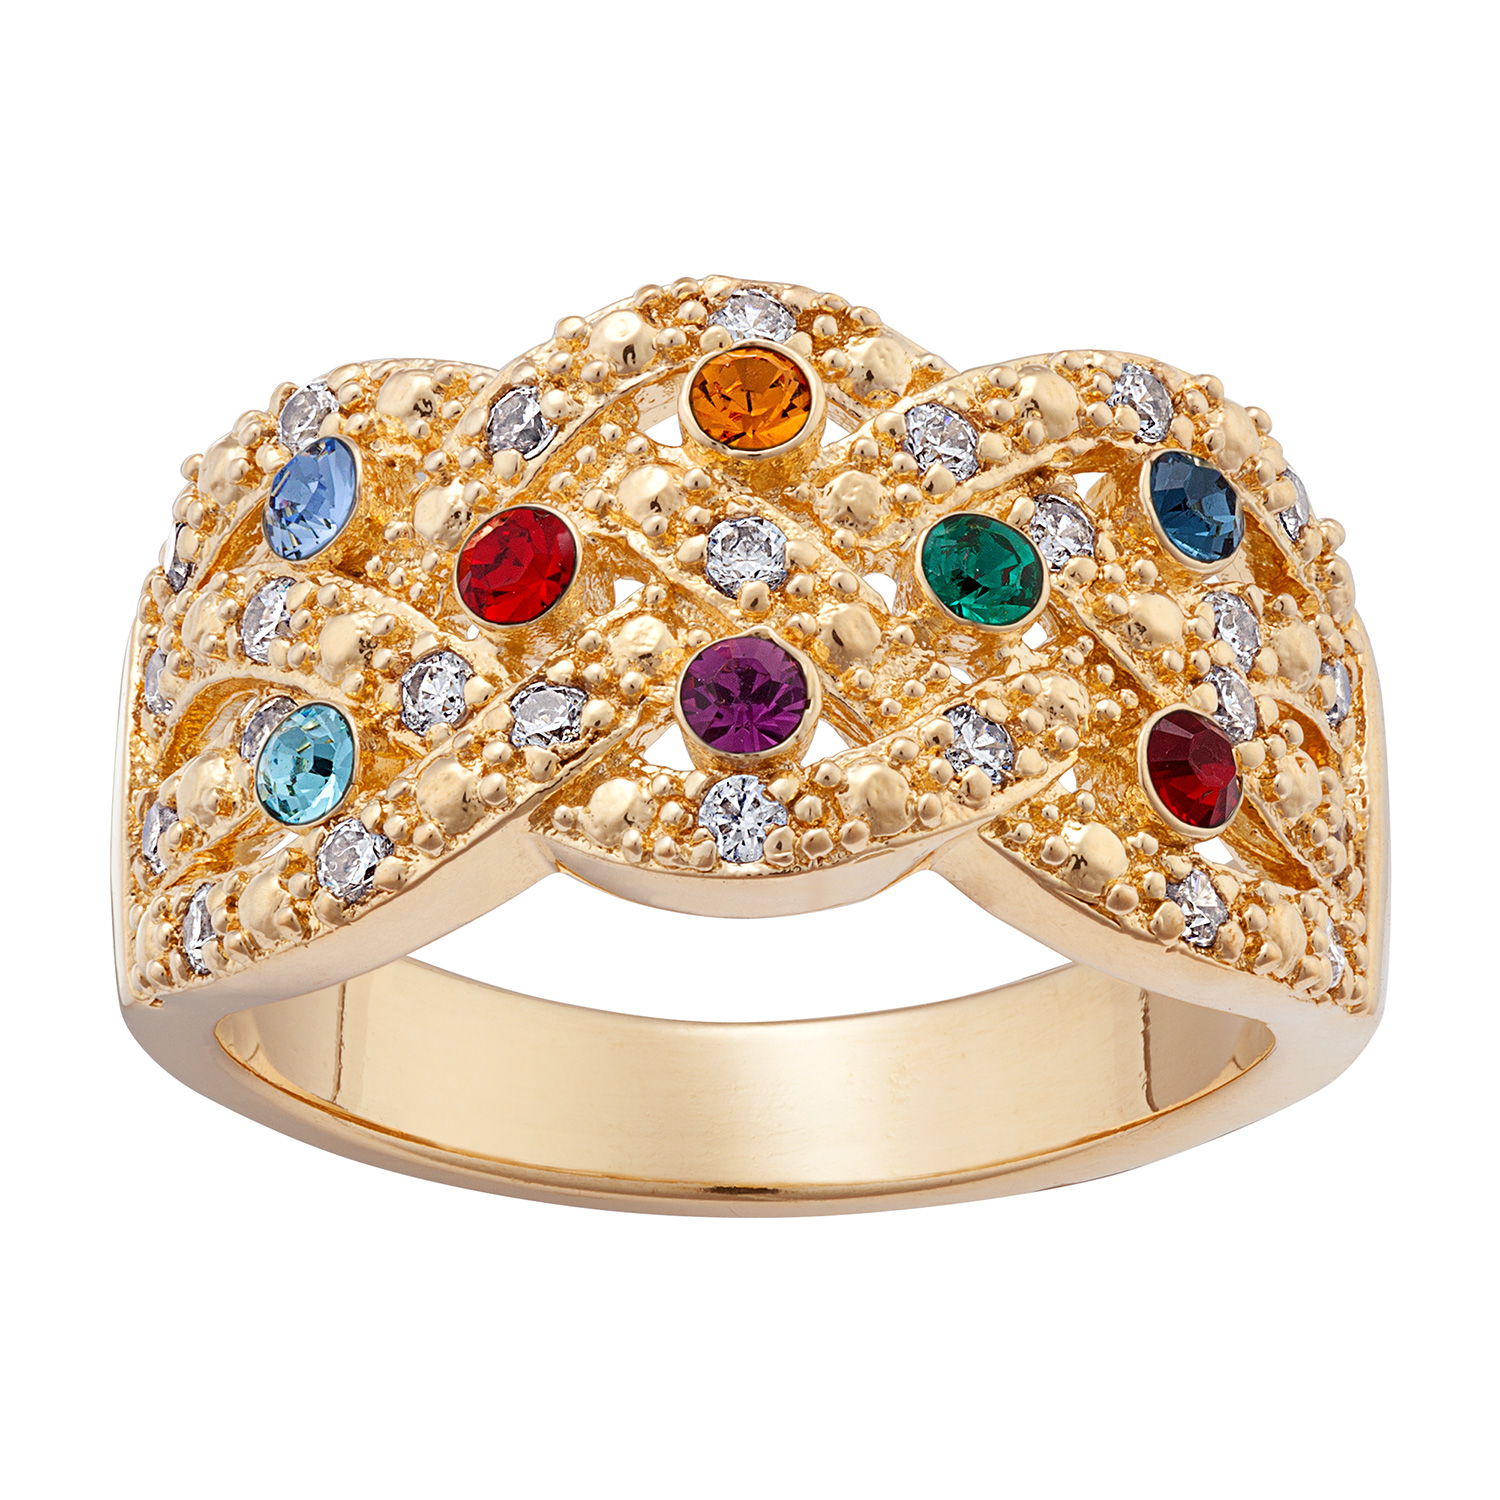 Mother's Braided Birthstone Ring